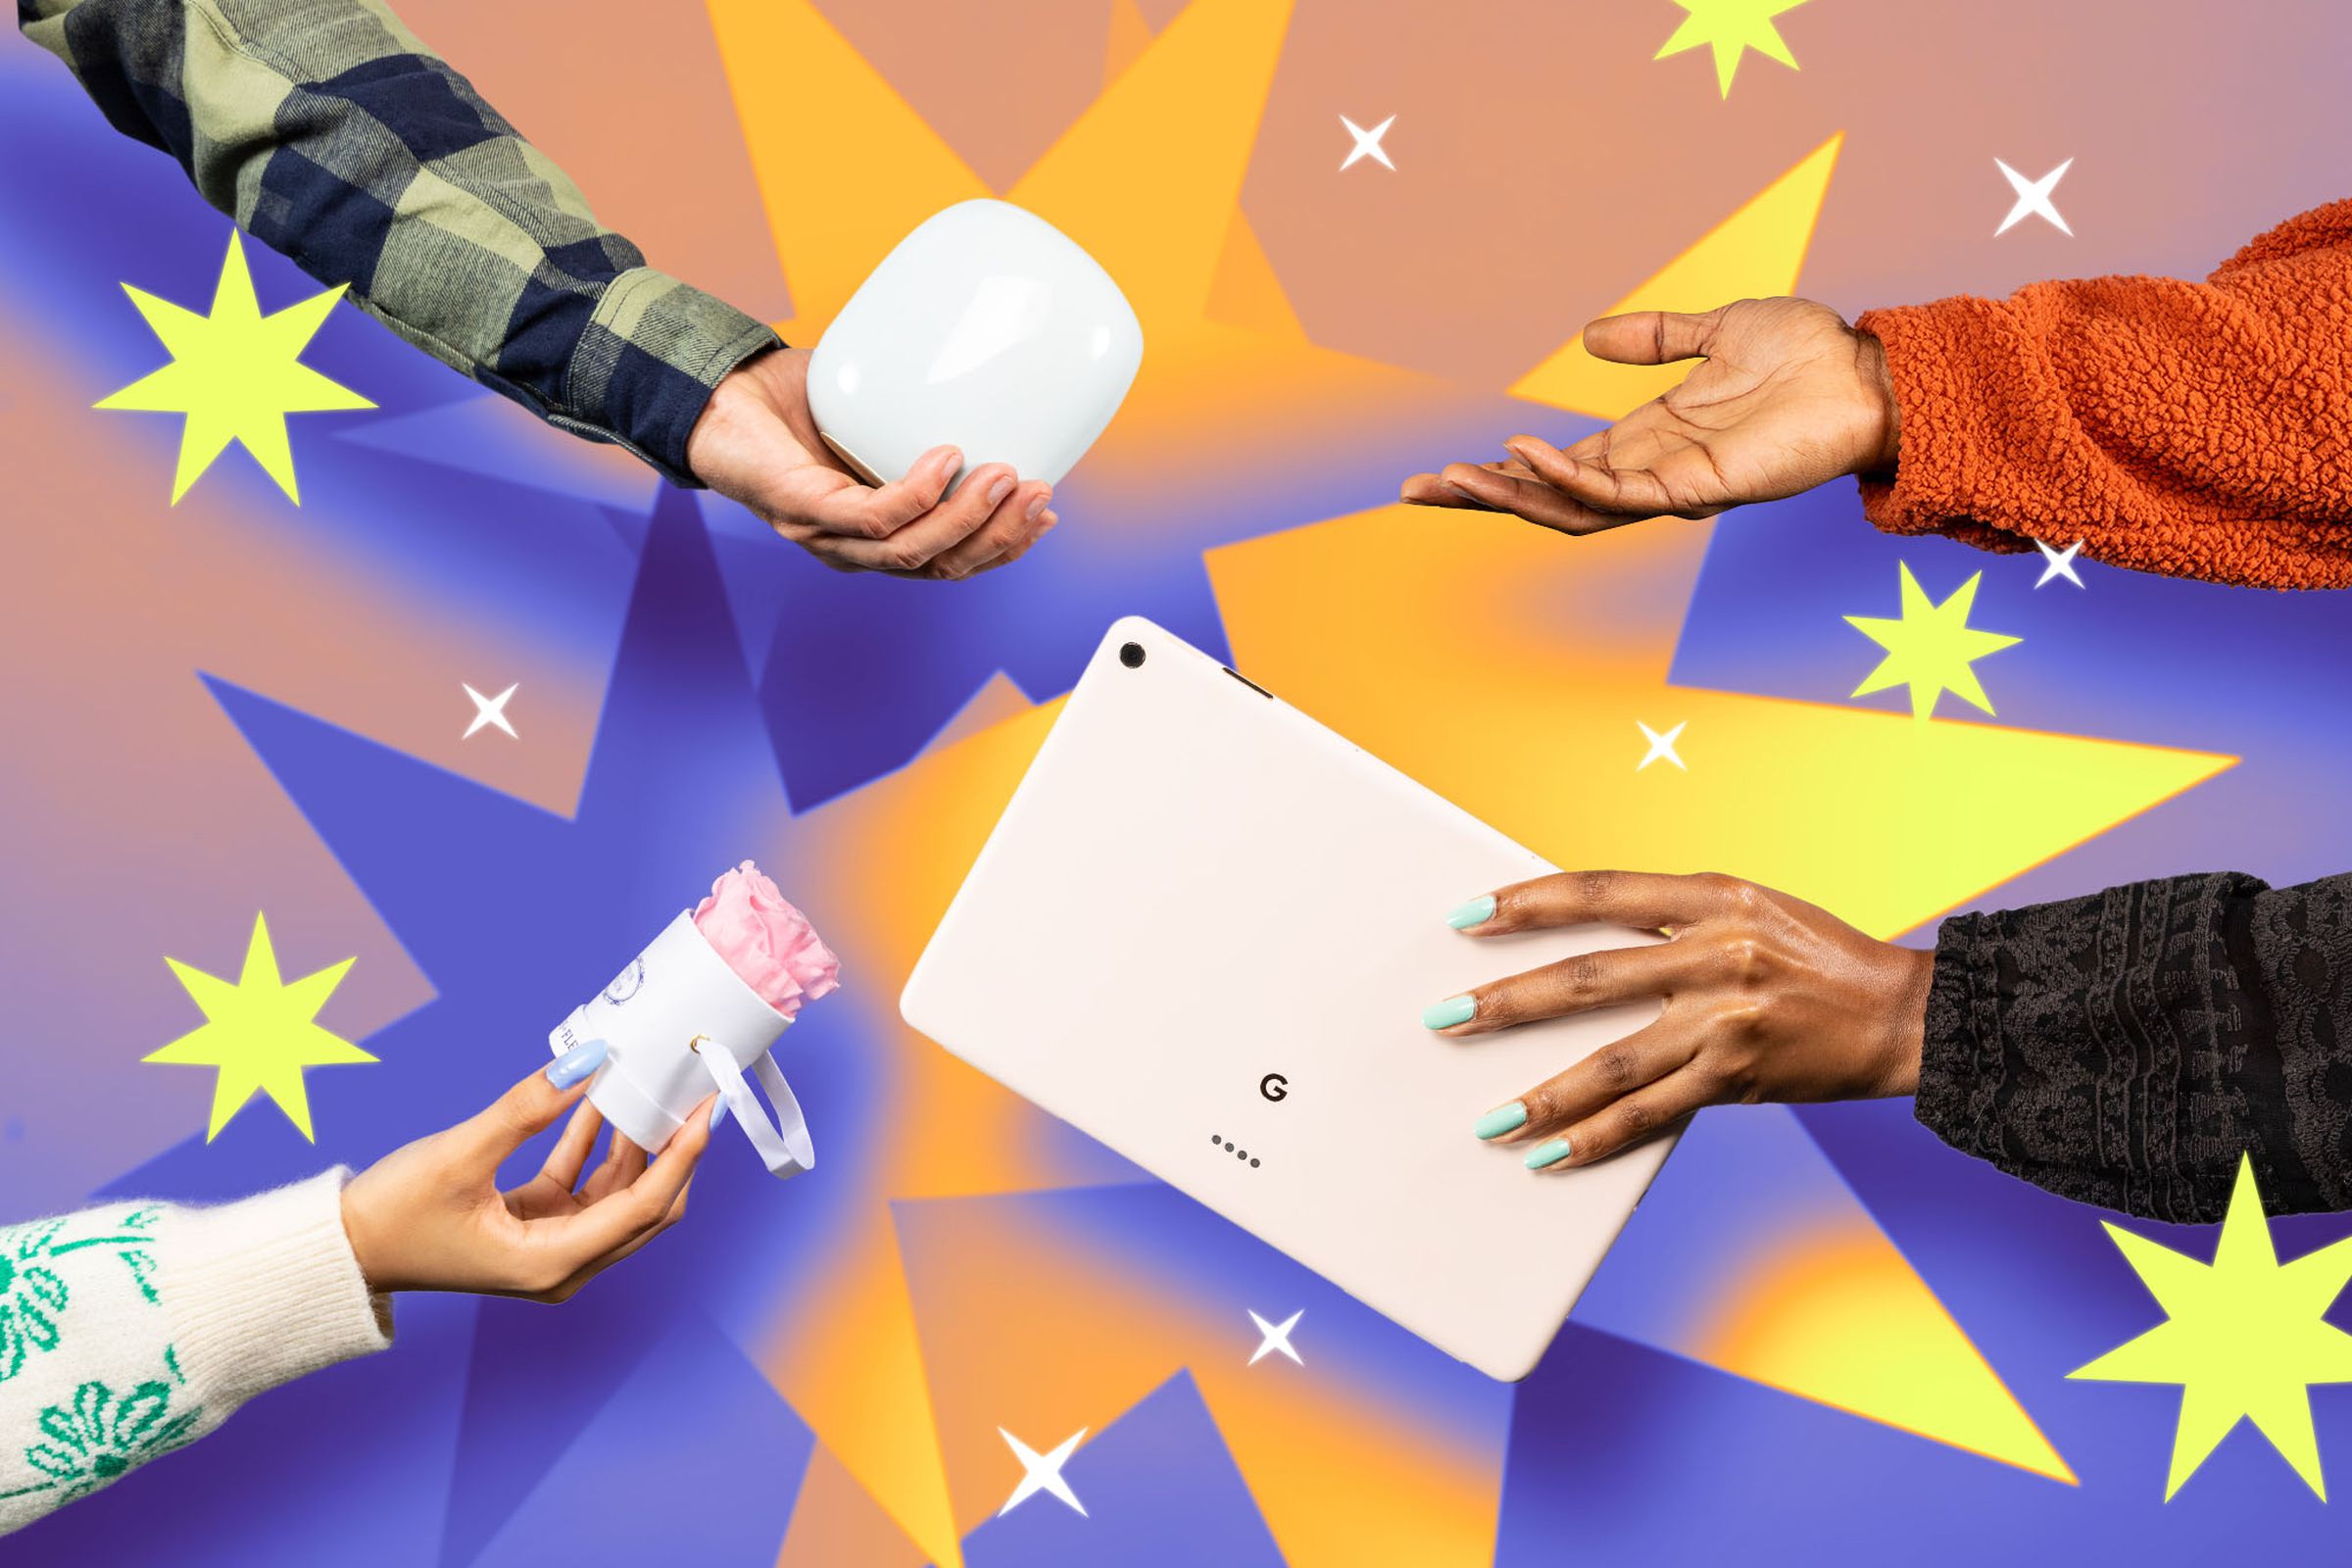 Hands holding different products on a graphic background of brightly colored stars.